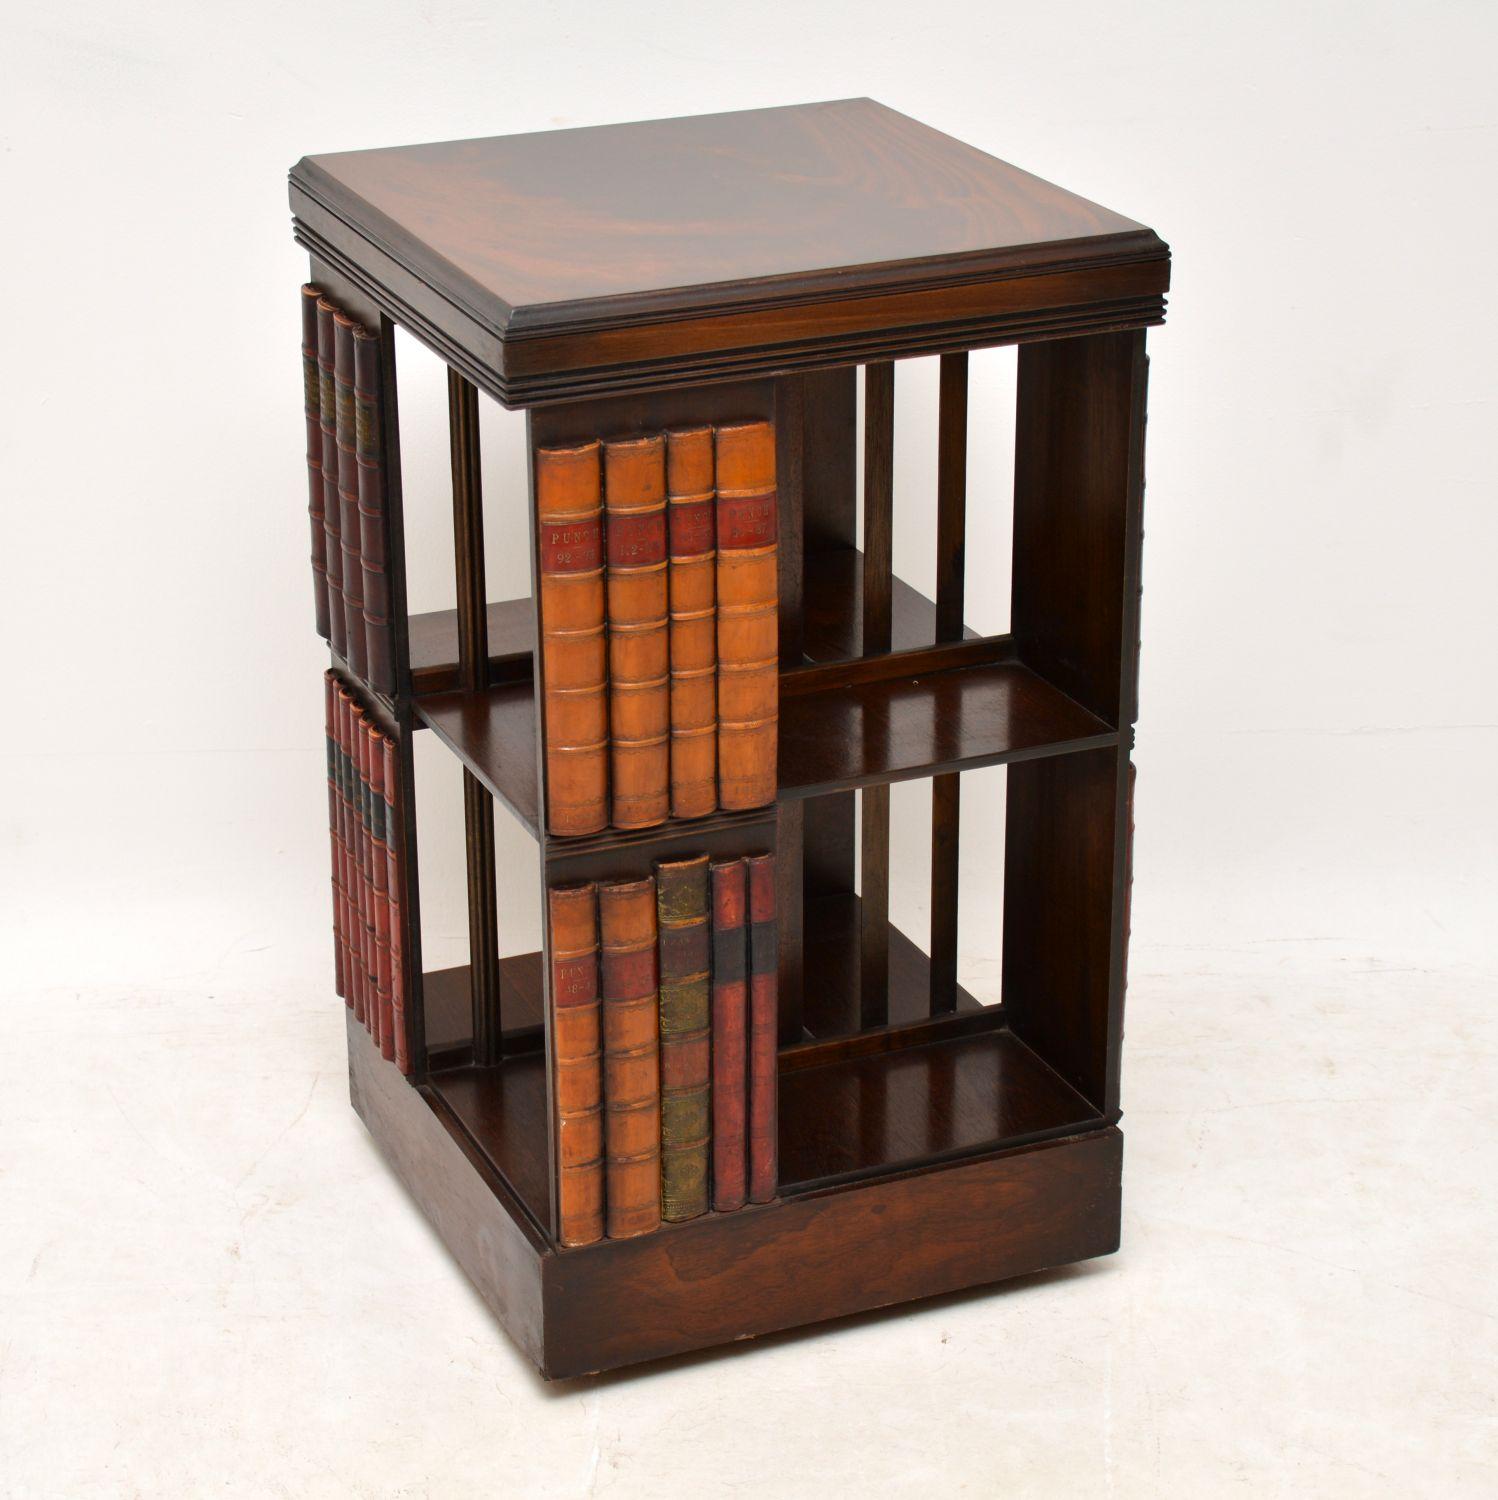 Antique George III style mahogany revolving bookstand with faux book decoration on all sections. This stand is in good original condition, having just been French polished and dates to around the 1950s period. The top is flame mahogany and there are